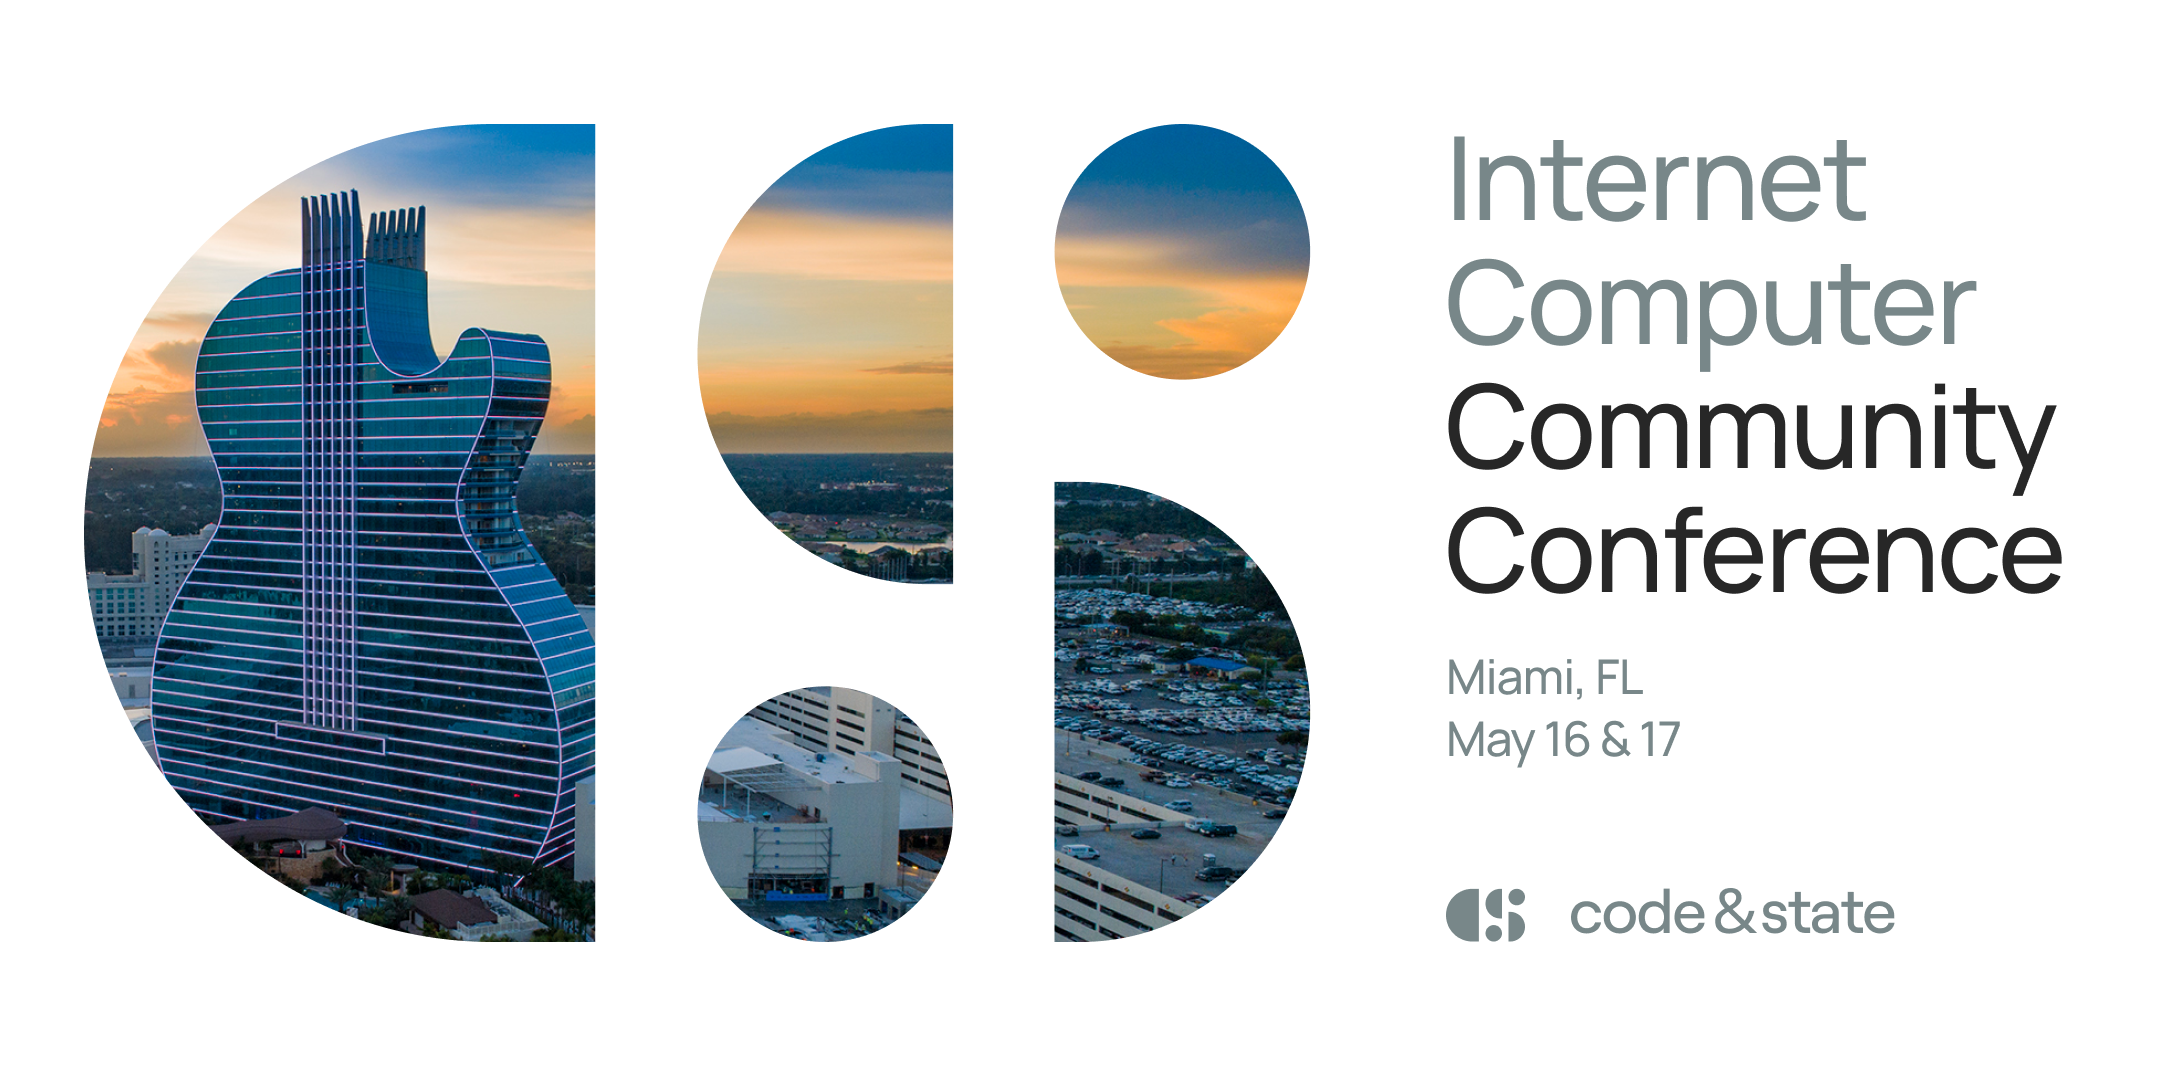 ICP Community Conference in Miami with Blockchain Boy & Joshua Jake - Early Bird Tickets On Sale Now!